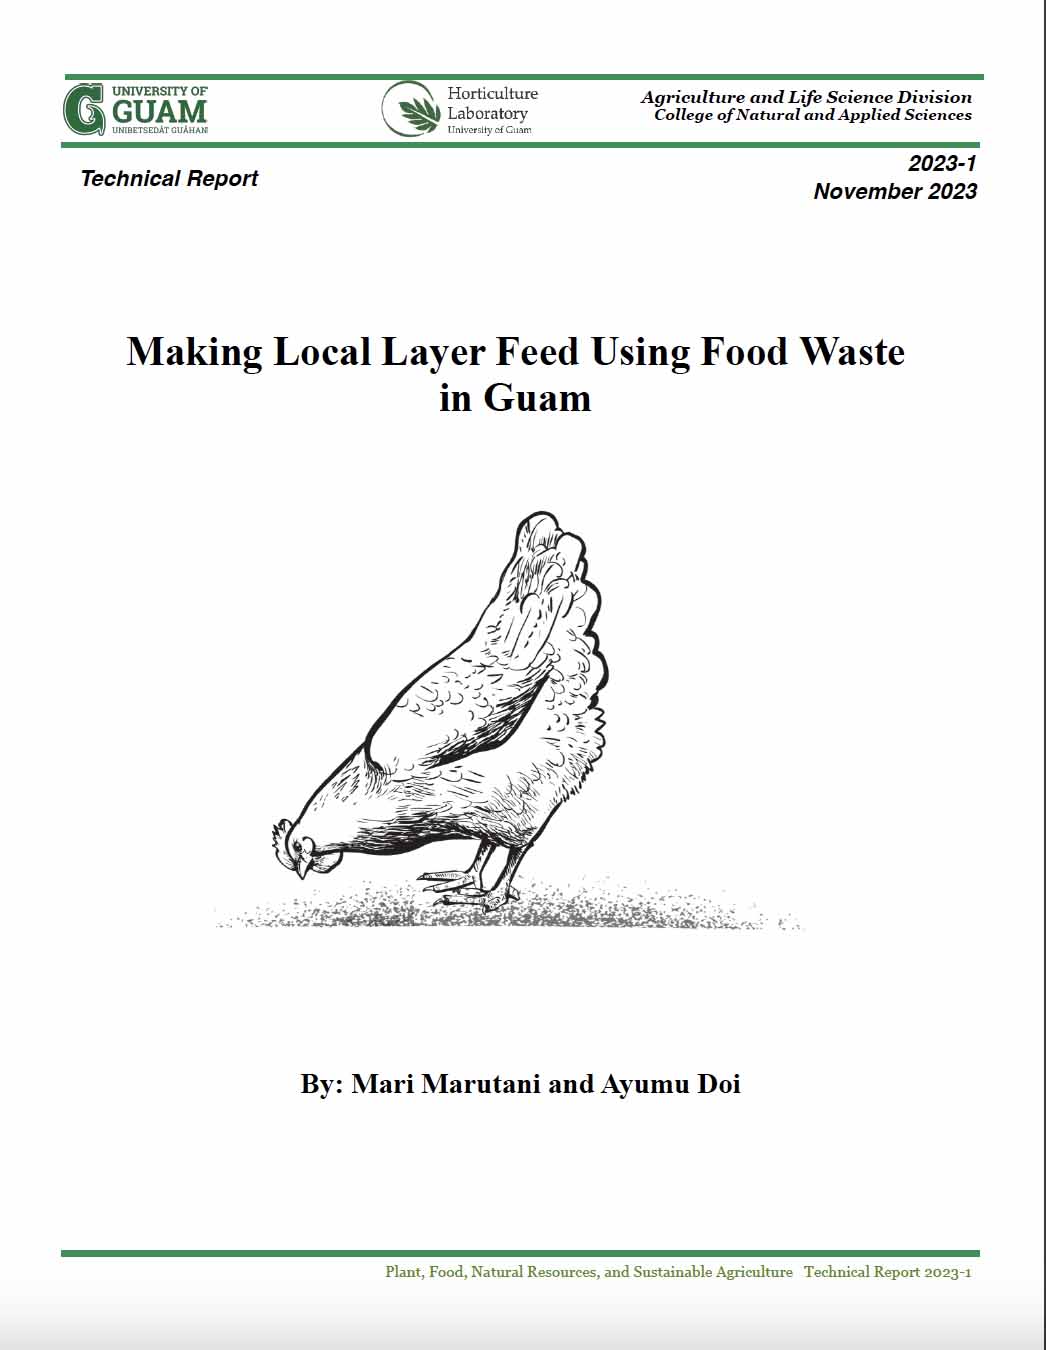 Thumbnail for Making Local Layer Feed publication